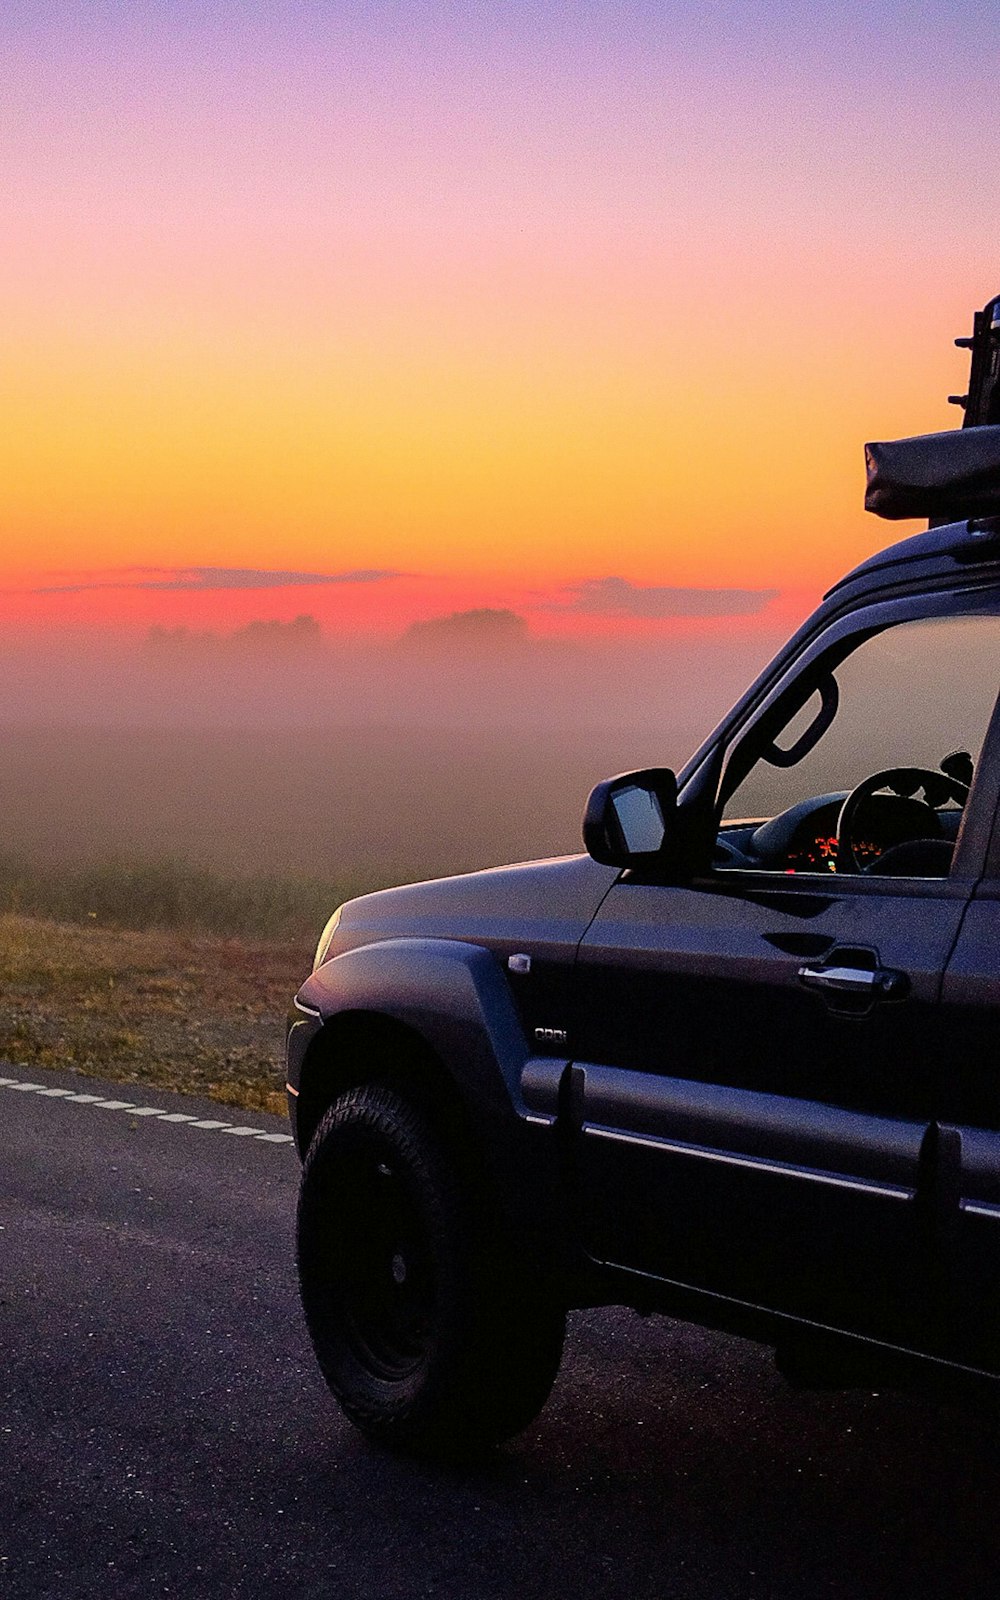 a truck parked on the side of a road with a sunset in the background